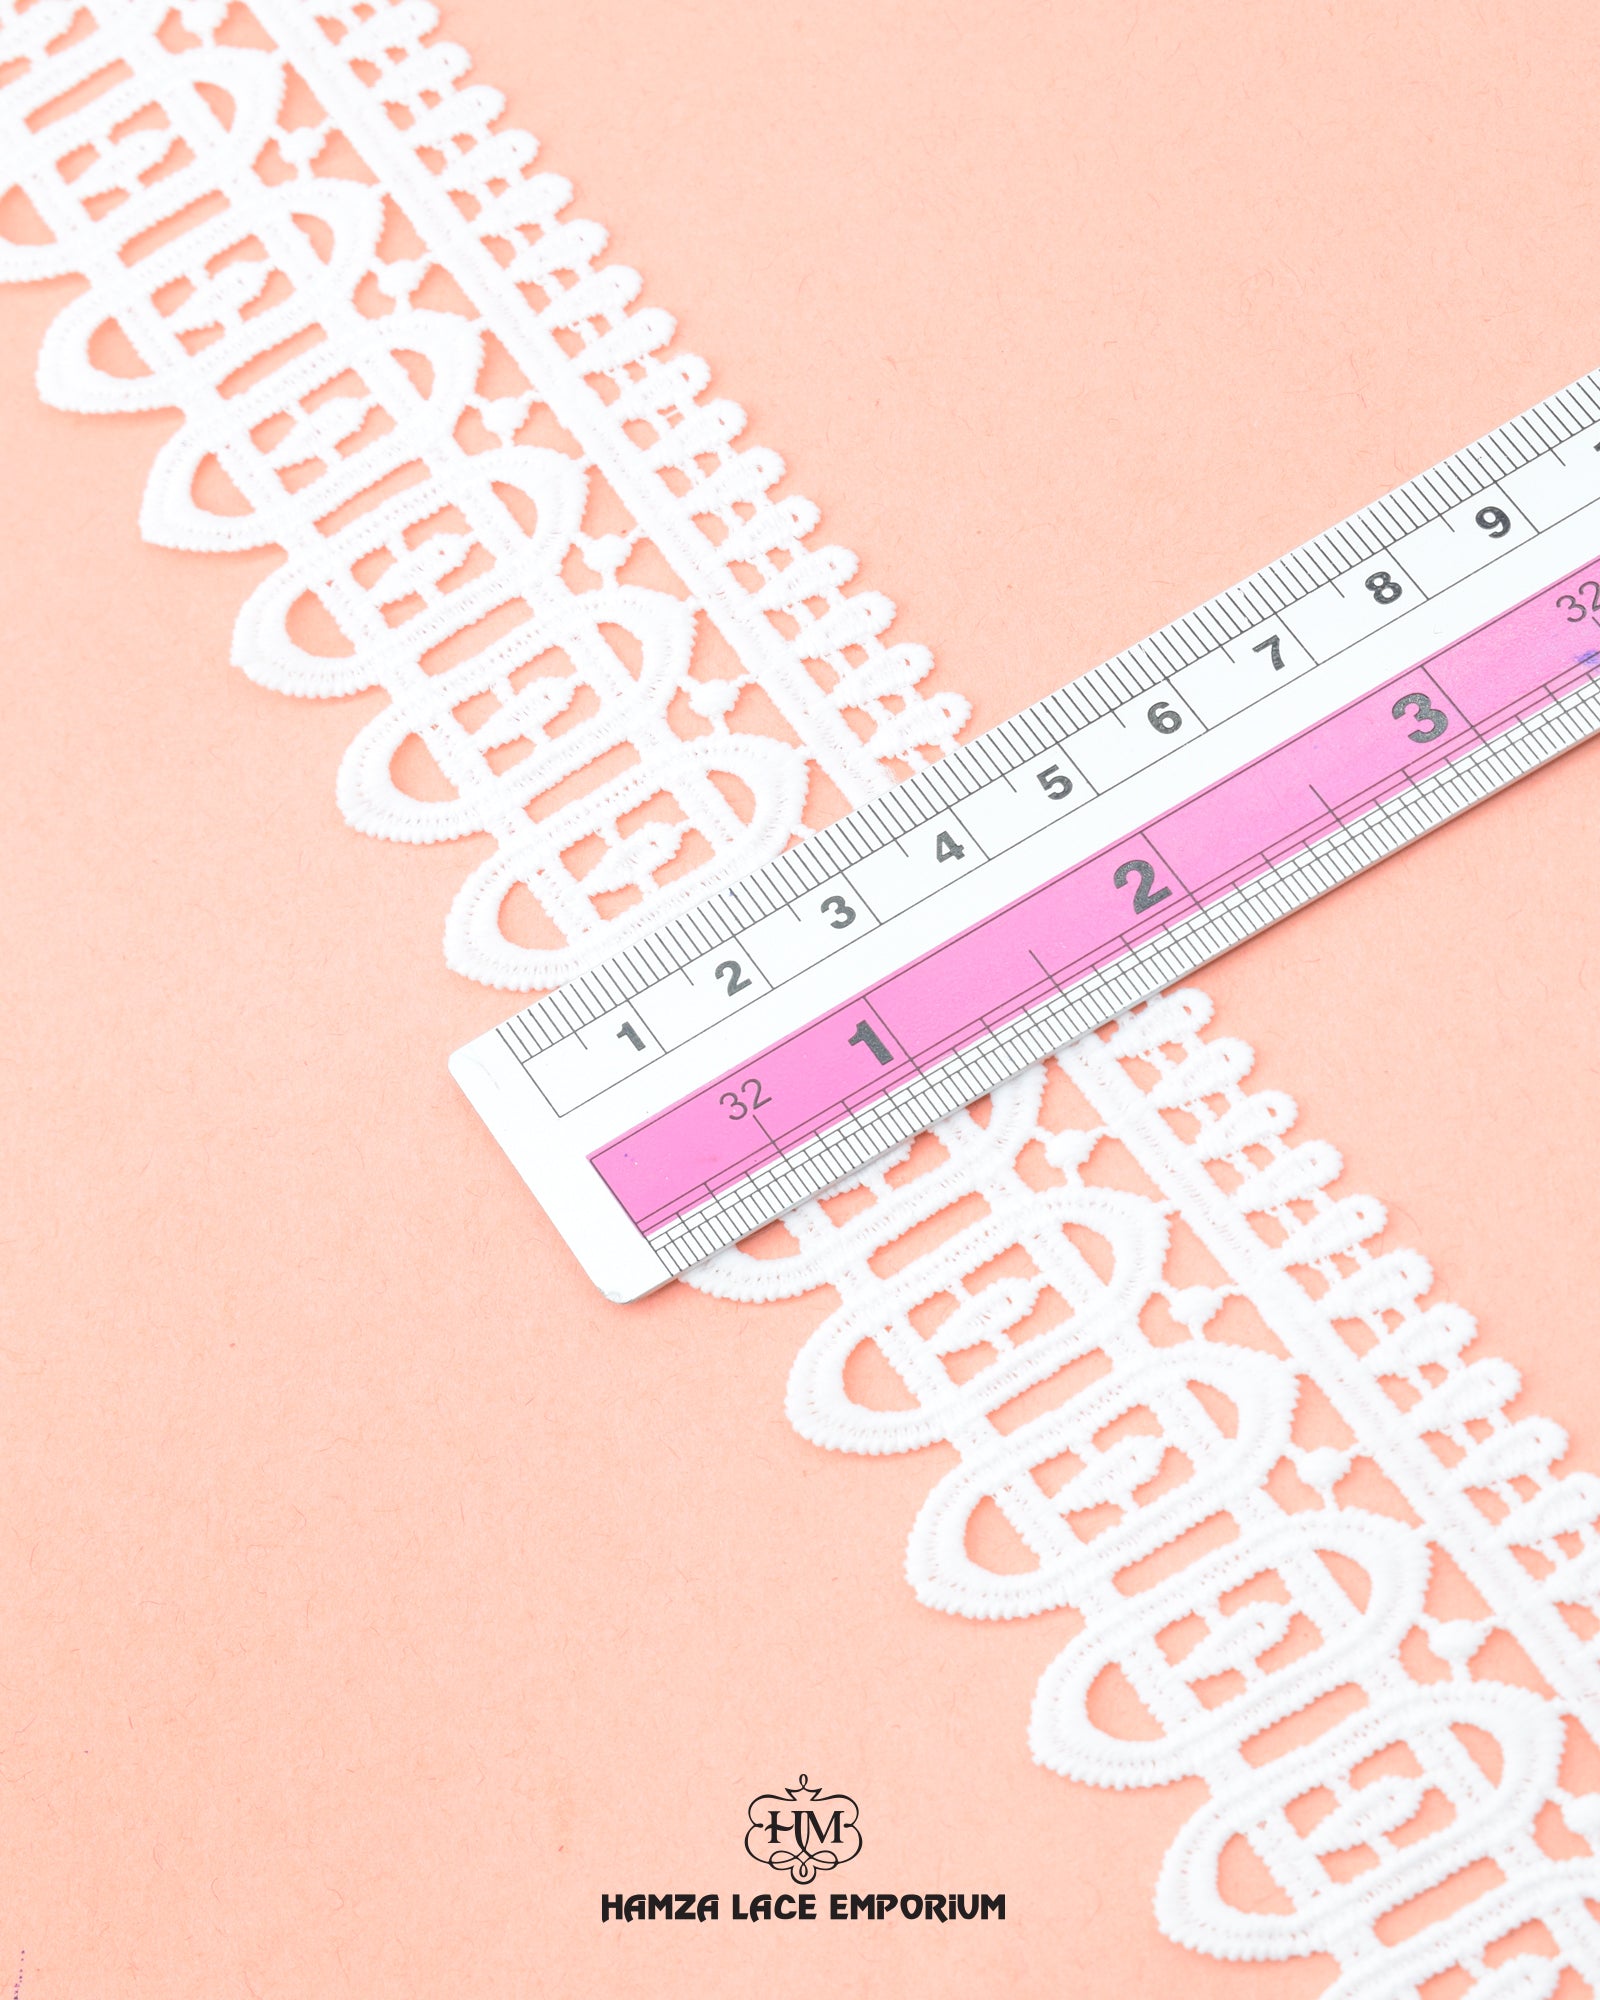 Size of the 'Edging Loop Lace 23112' is shown as '1' inches with the help of a ruler